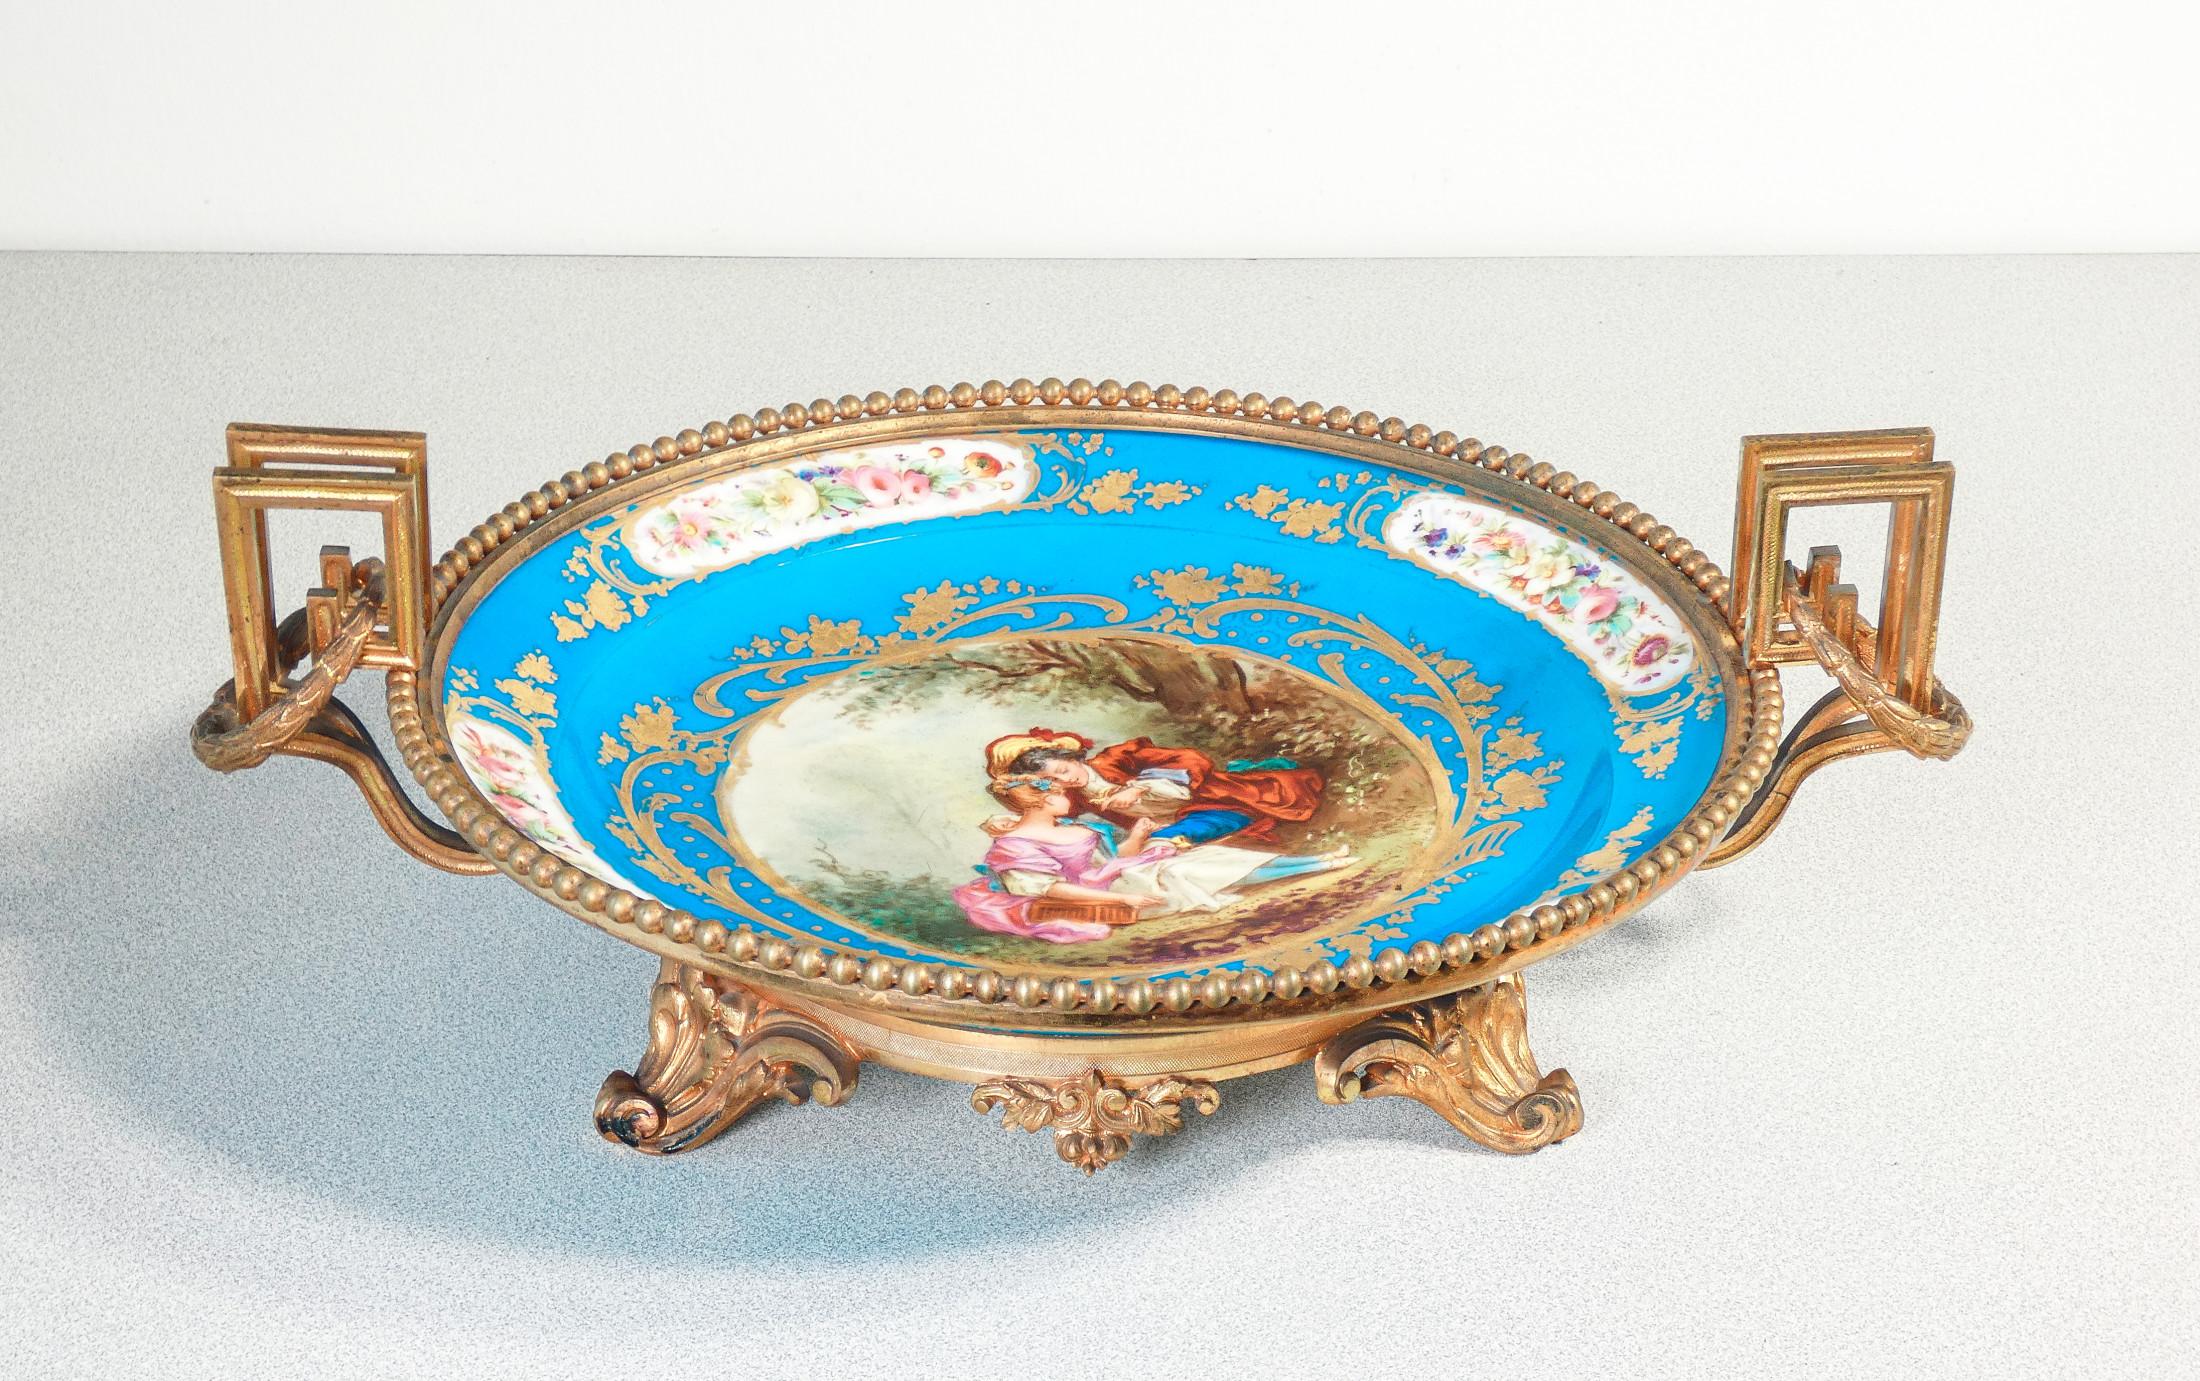 Porcelain riser
french hand-painted
with gallant scene.

ORIGIN
France

PERIOD
Early twentieth century

MARK
French manufacture

MODEL
Riser, fruit bowl centerpiece

MATERIALS
Painted Porcelain
by hand and gilded,
gilded metal

DIMENSIONS
Height:-